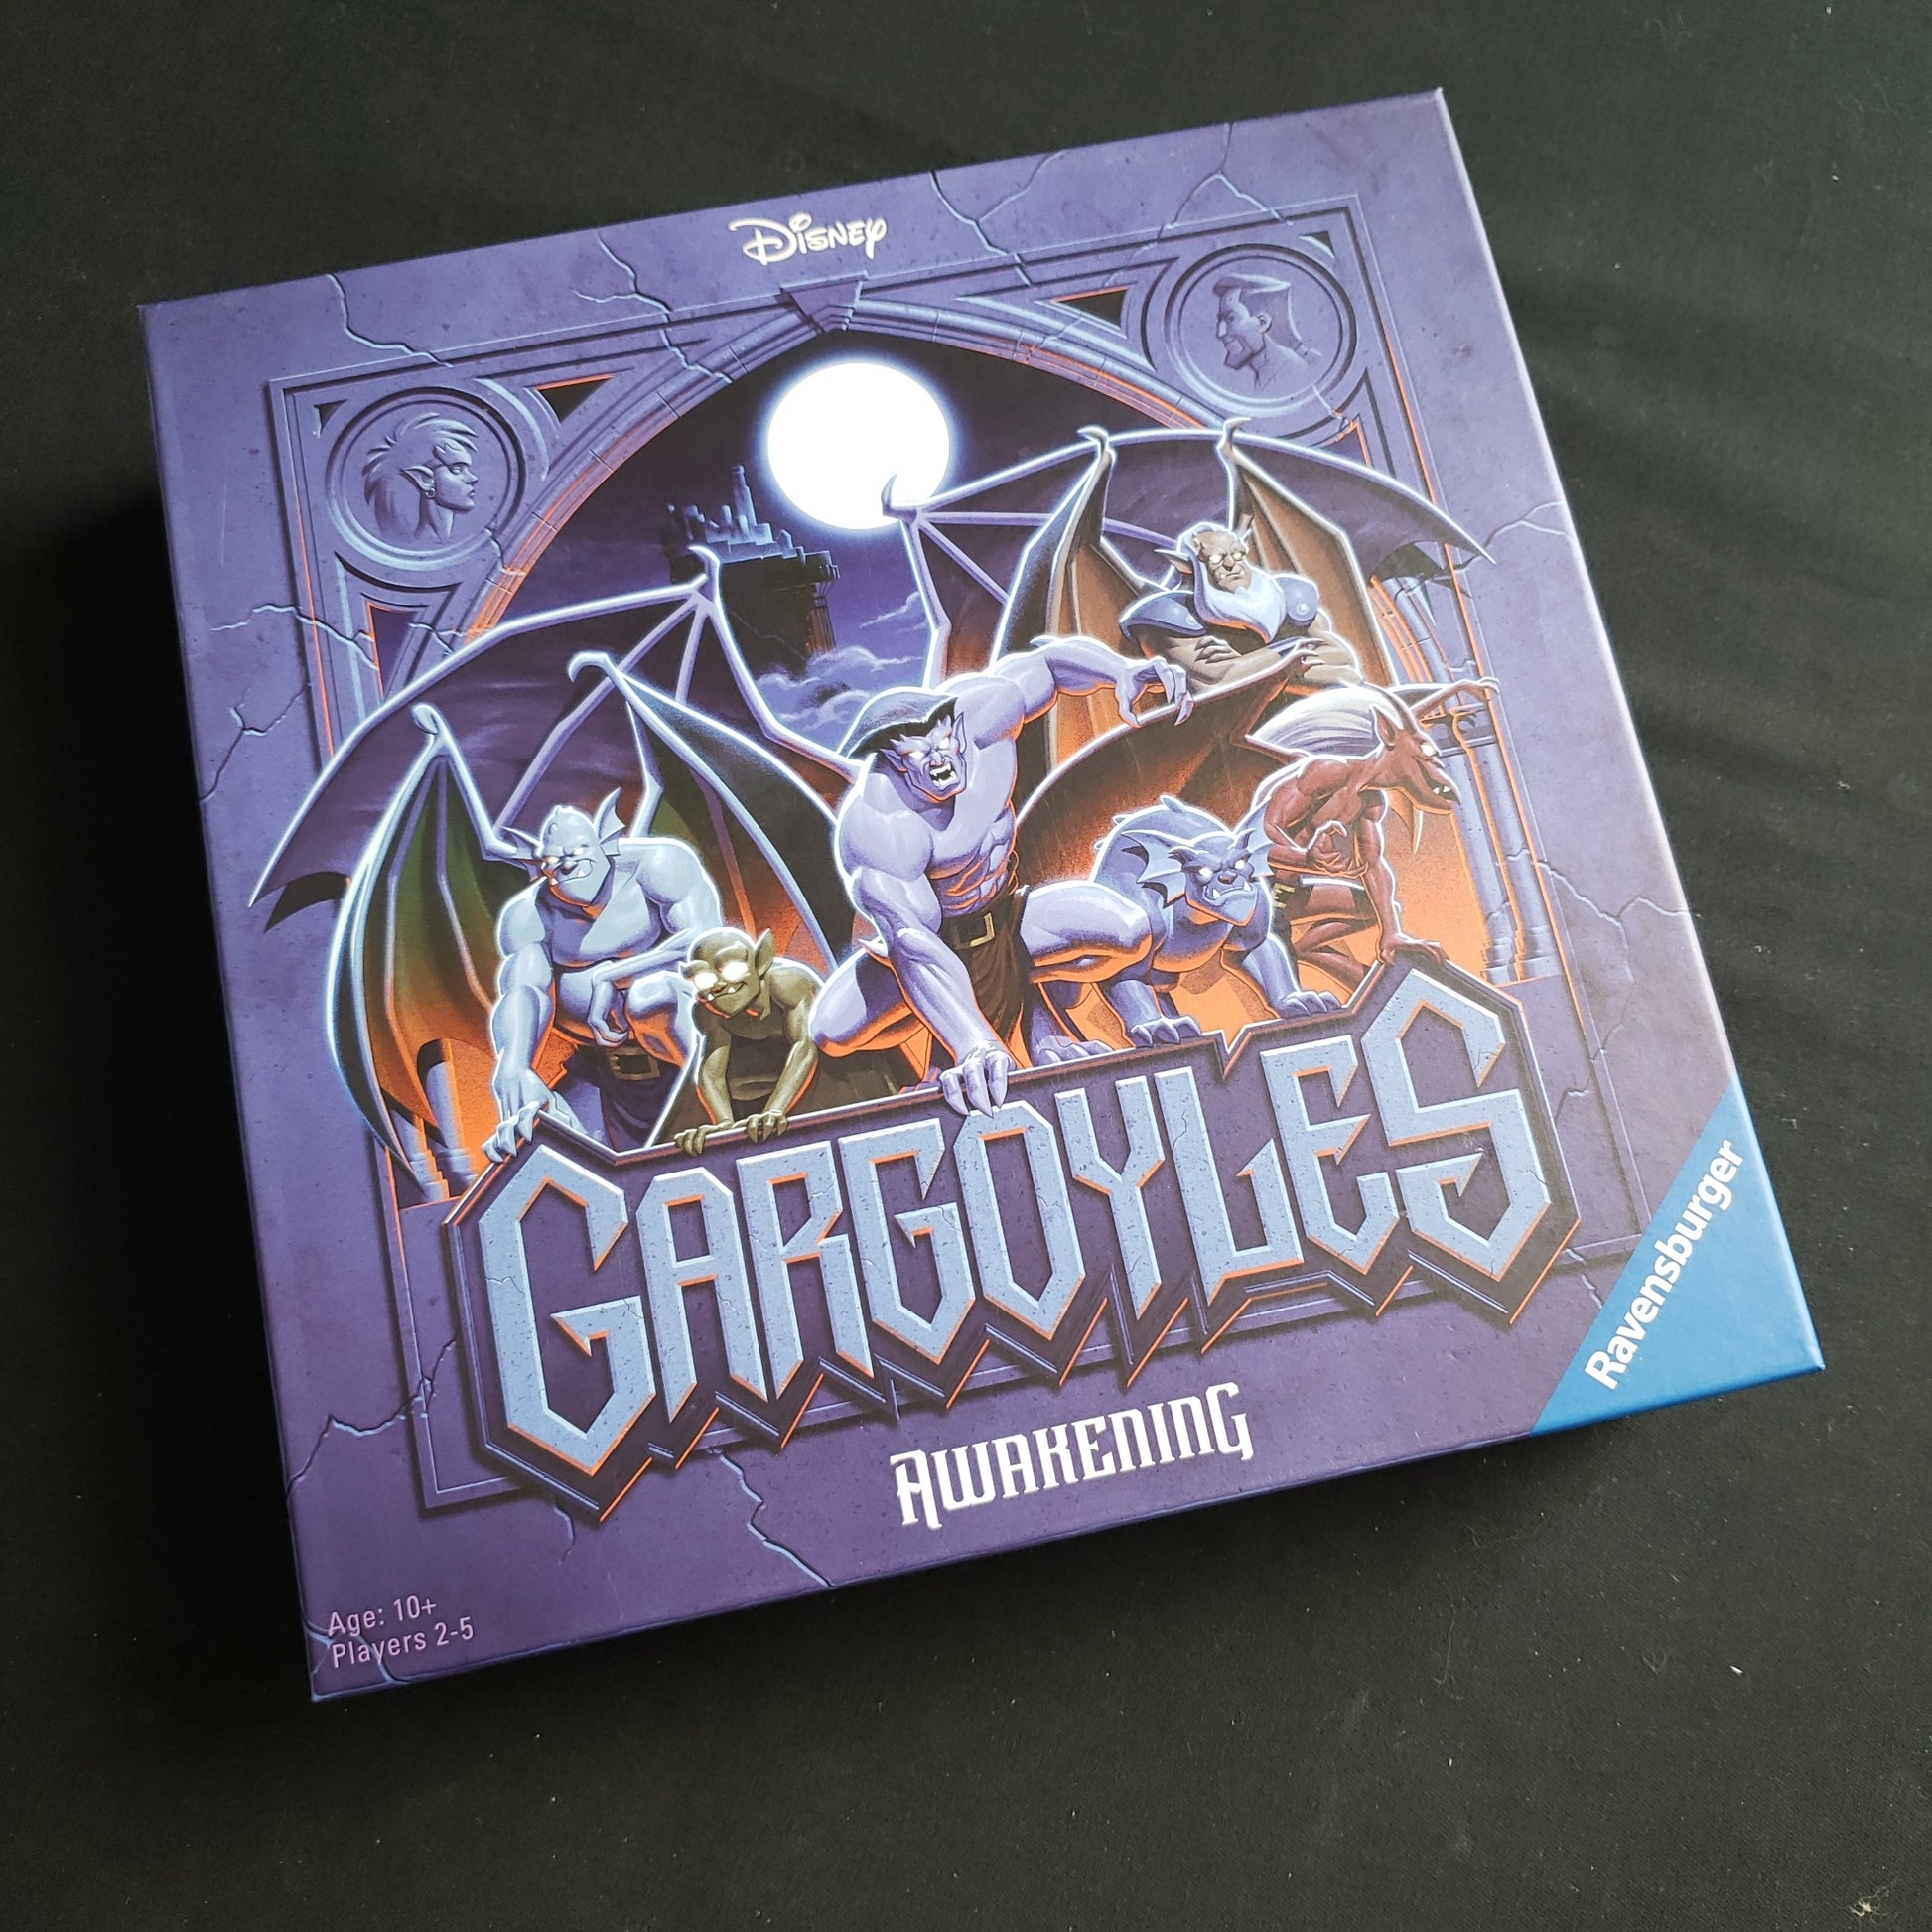 Image shows the front cover of the box of the Disney Gargoyles: Awakening board game